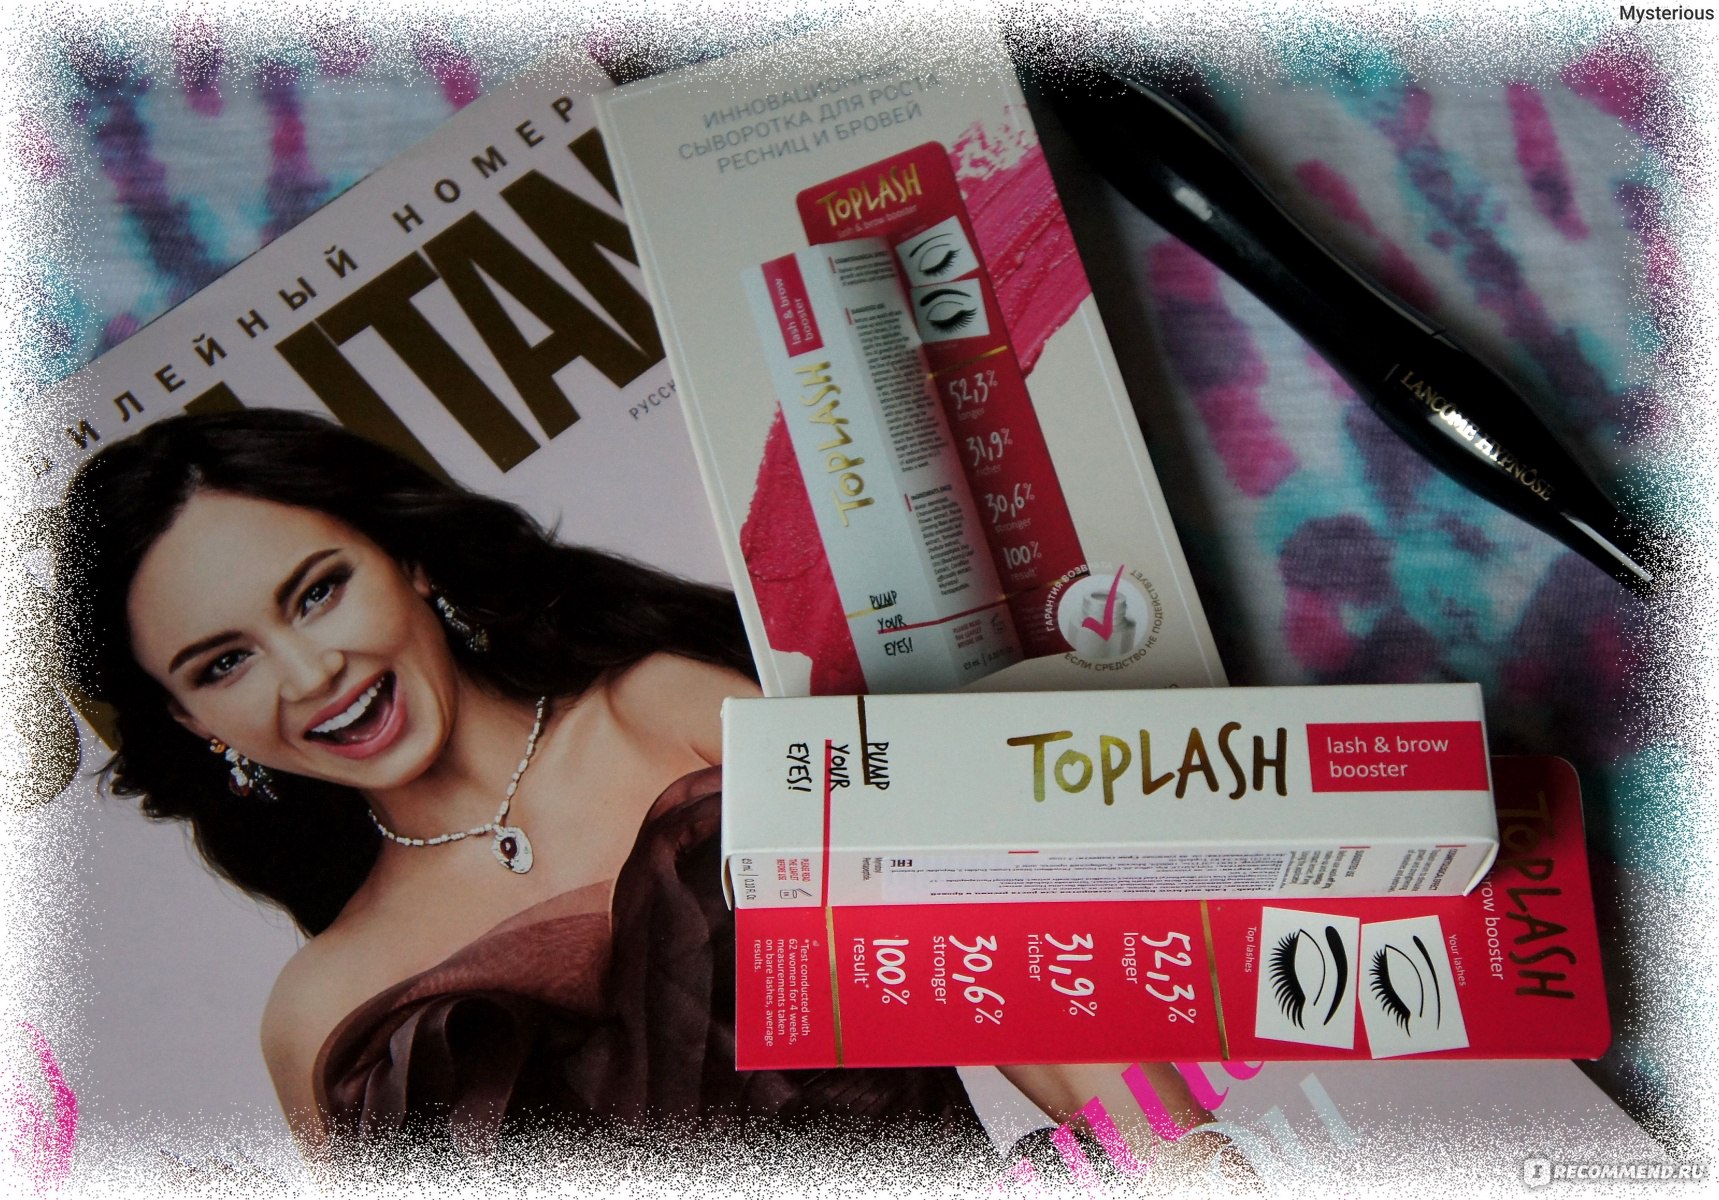 Toplash and brow booster. TOPLASH Lash and Brow Booster. Сыворотка TOPLASH Lash Brow. TOPLASH XL Lash Brow. TOPLASH Cosmetics Lash and Brow Booster.